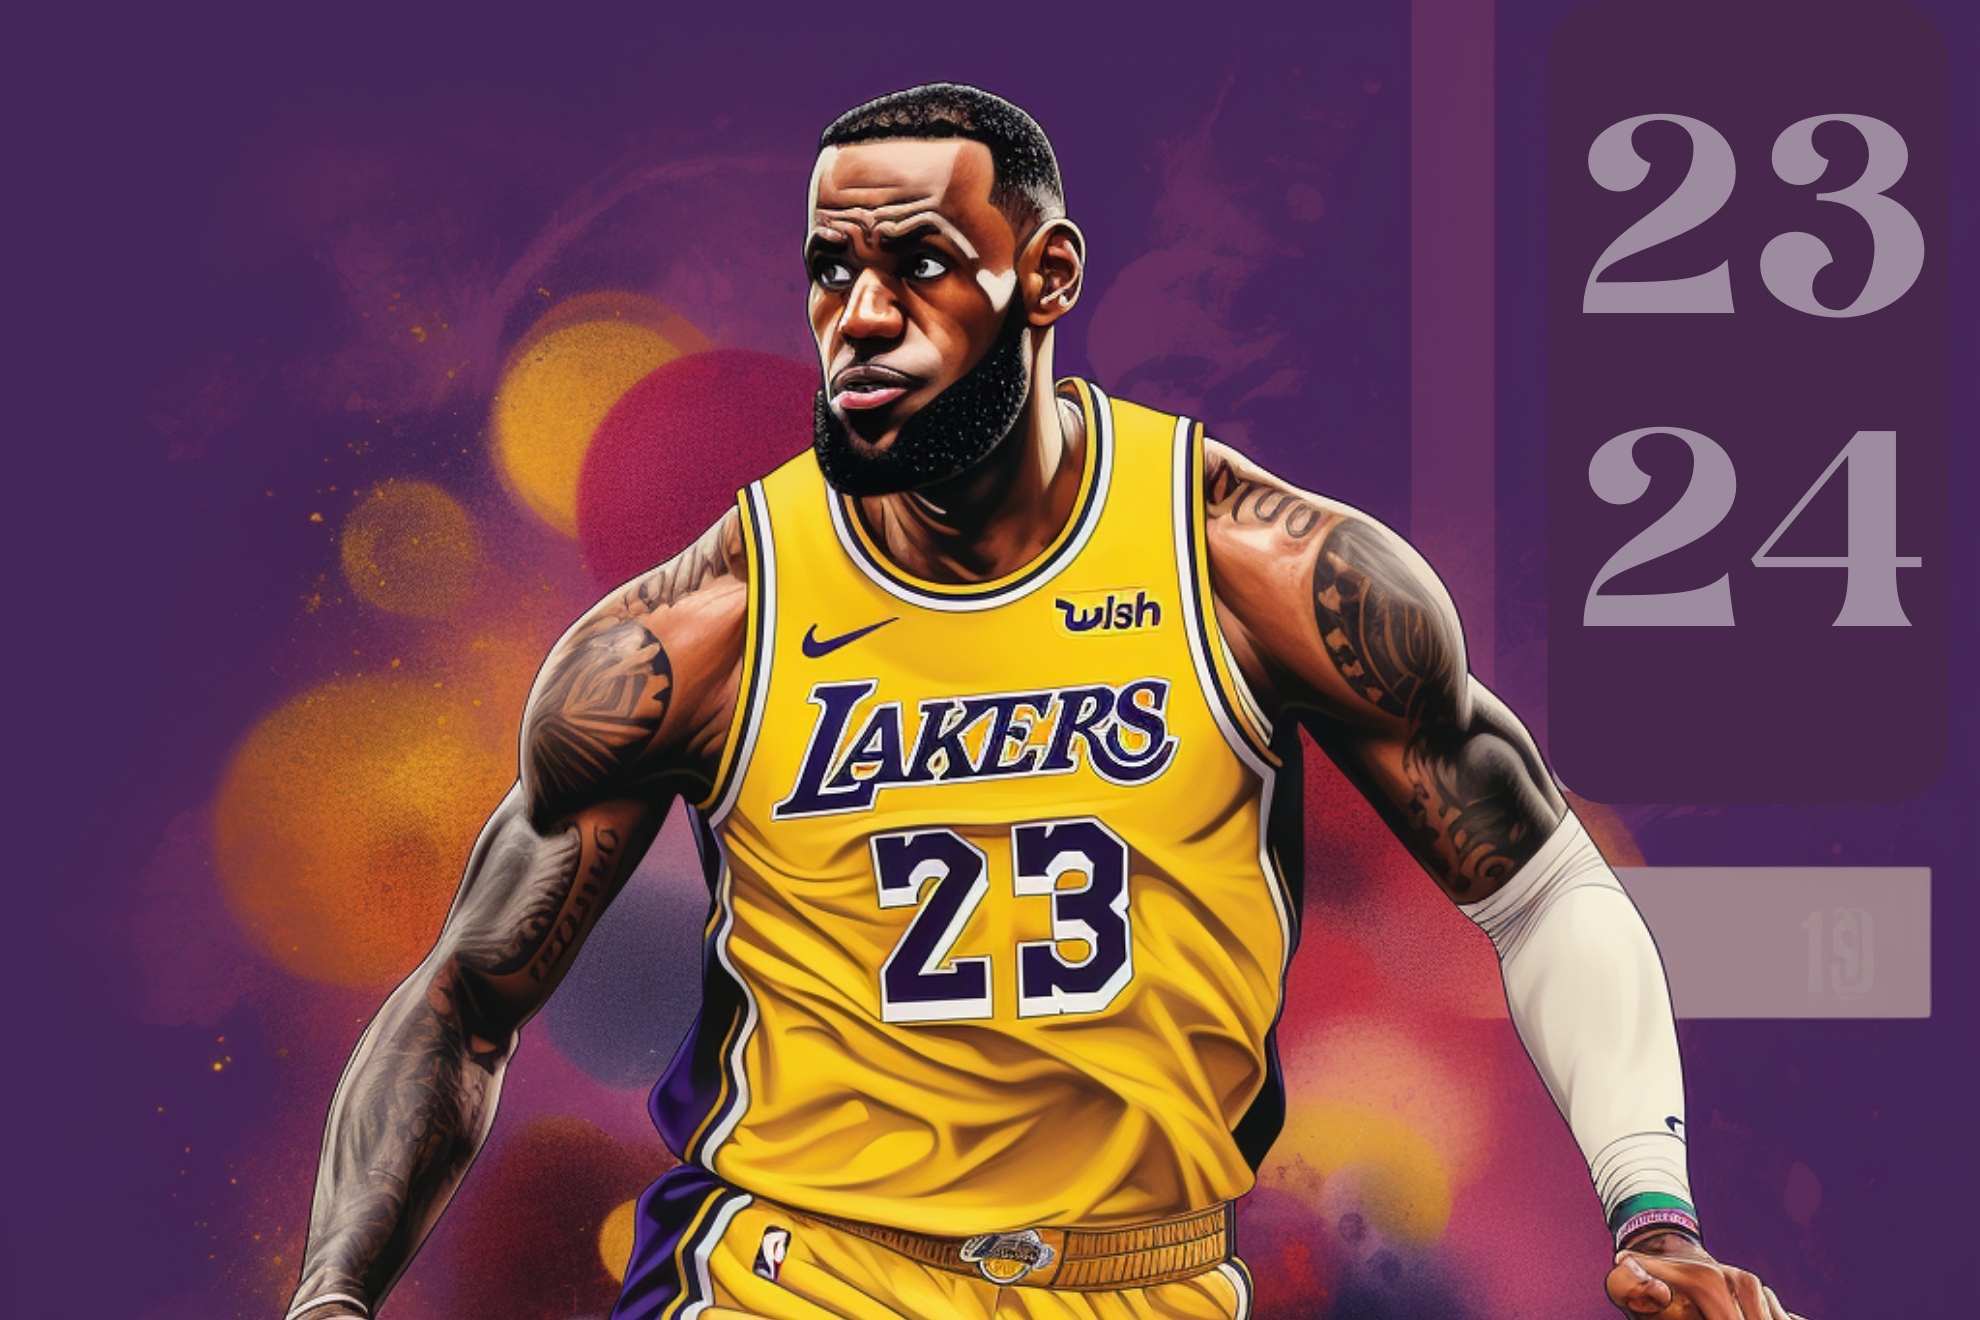 The NBA has released its official schedule for the 2023-24 season. The Nuggets will tip-off the season against LeBron James' LA Lakers.